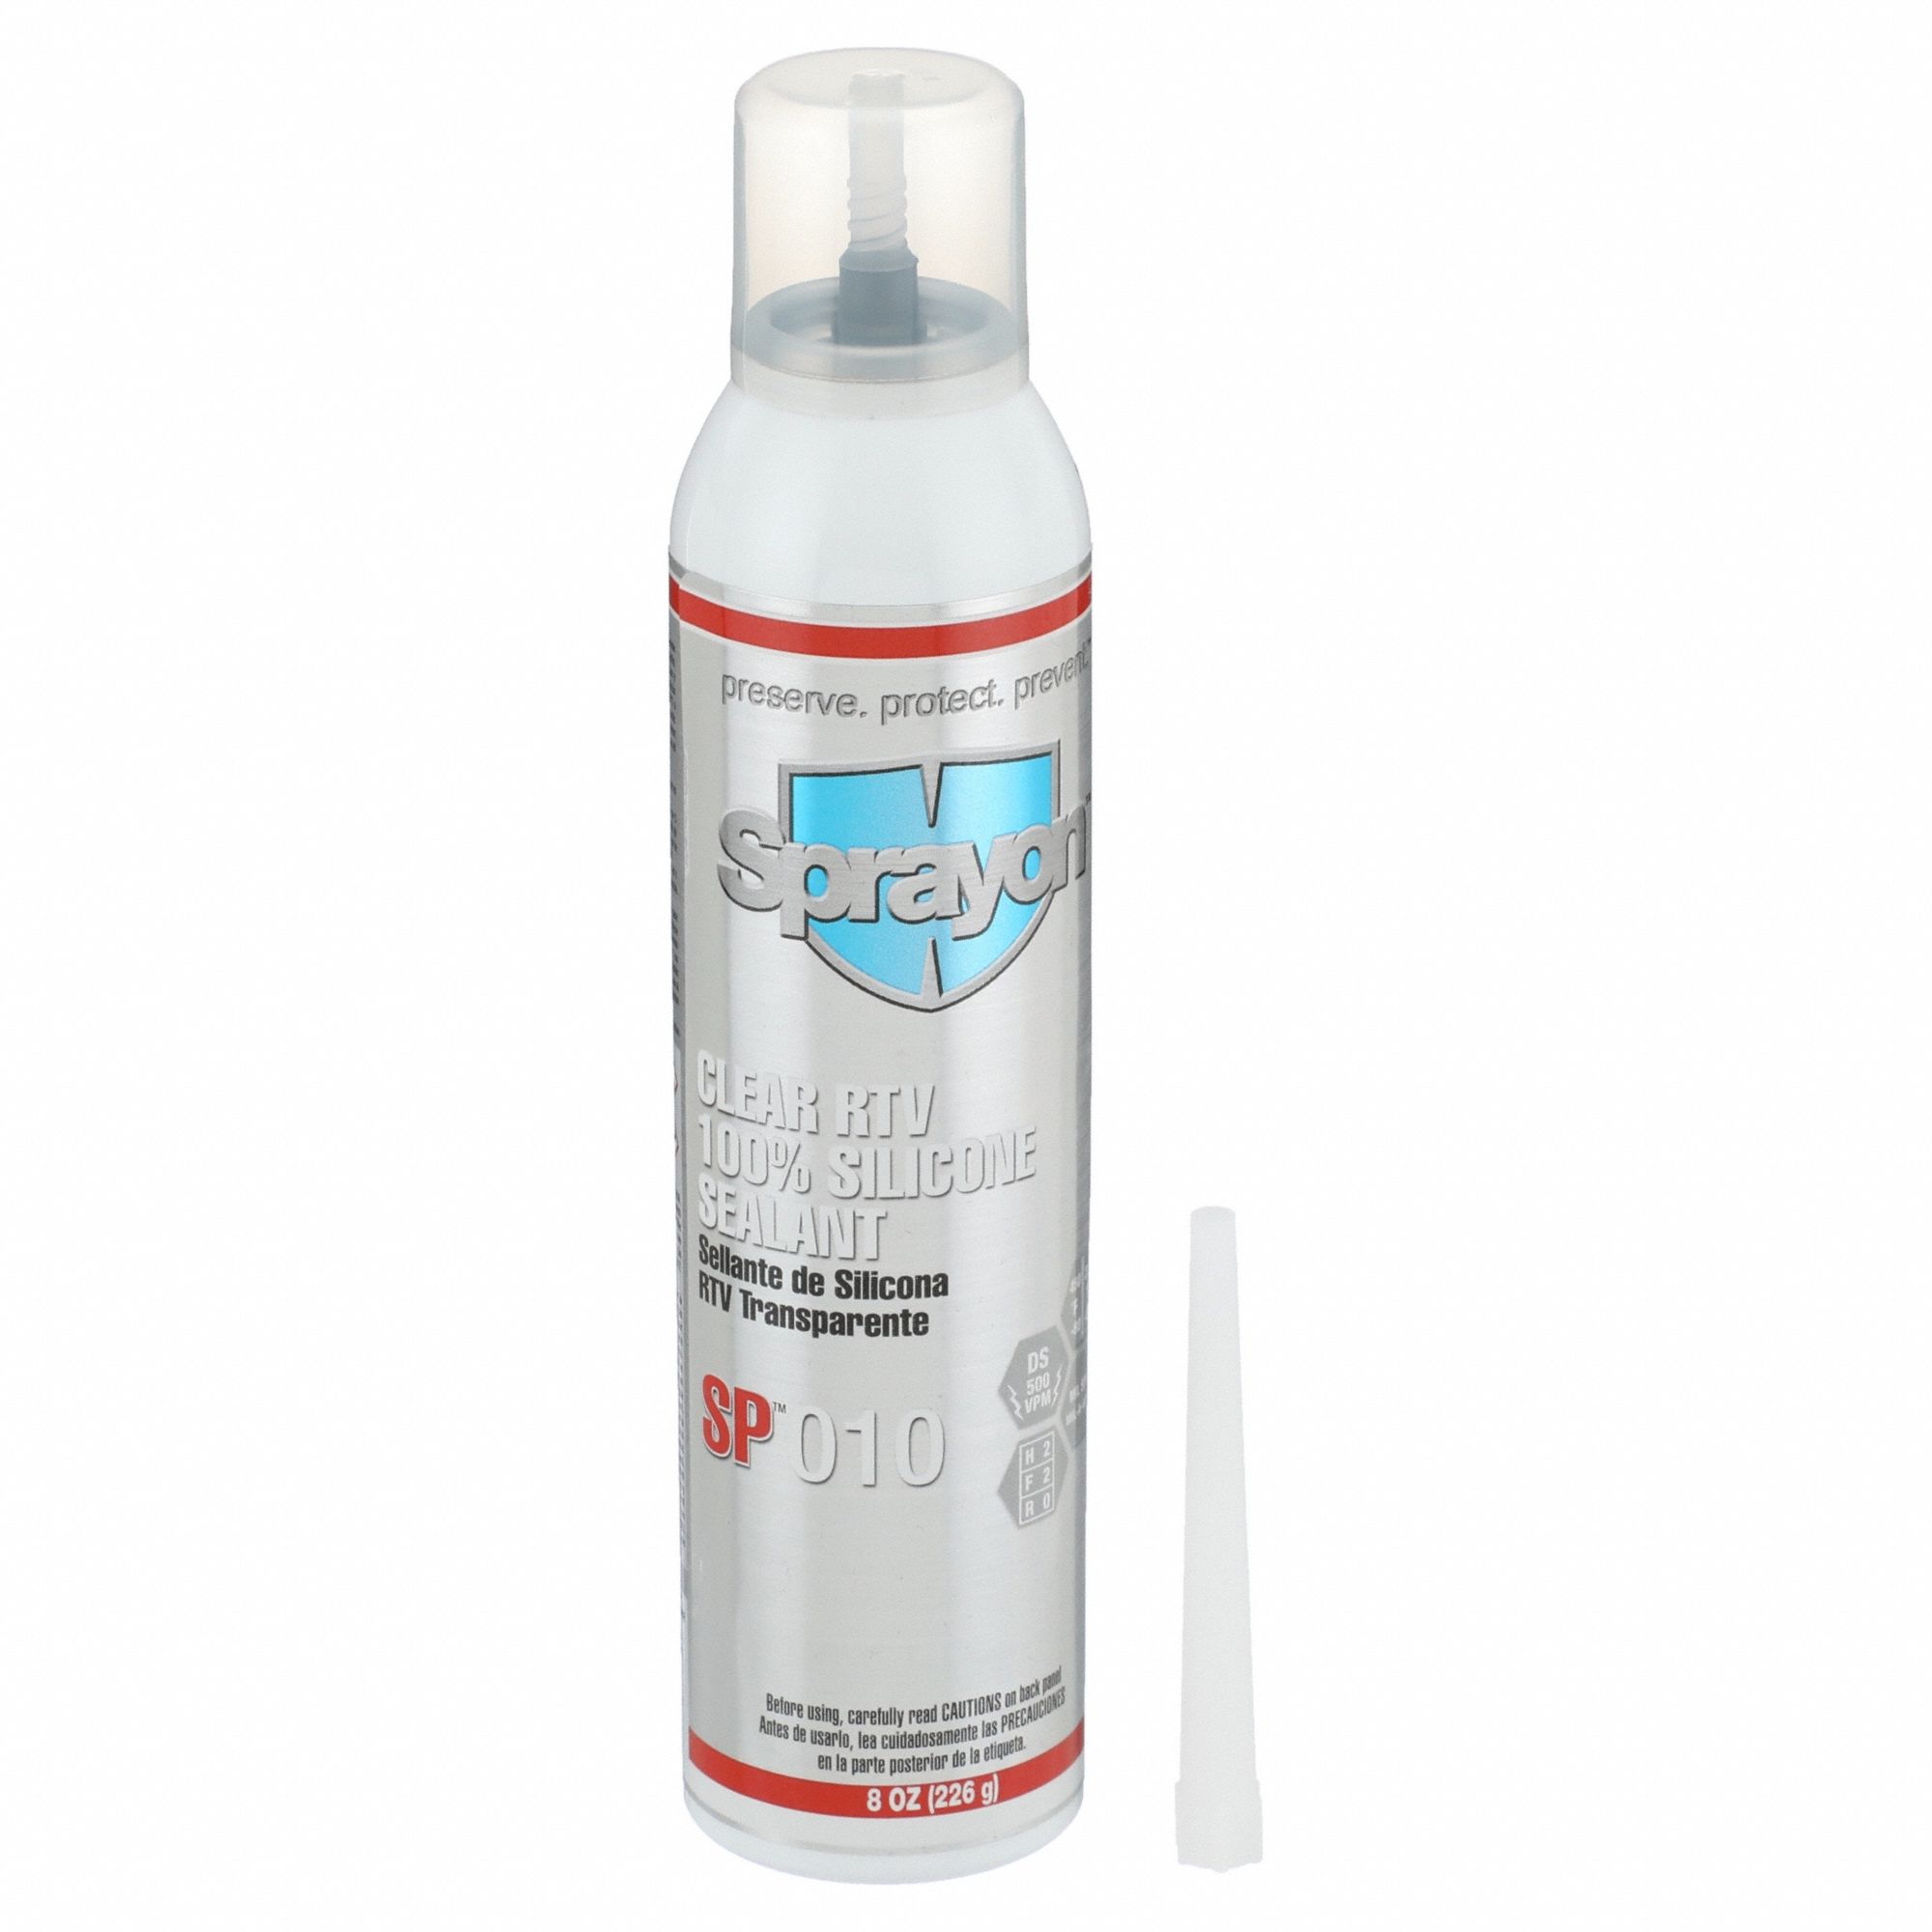 7680 Imperial RTV Silicone, Clear Paste, 8 oz. Spray Bottle